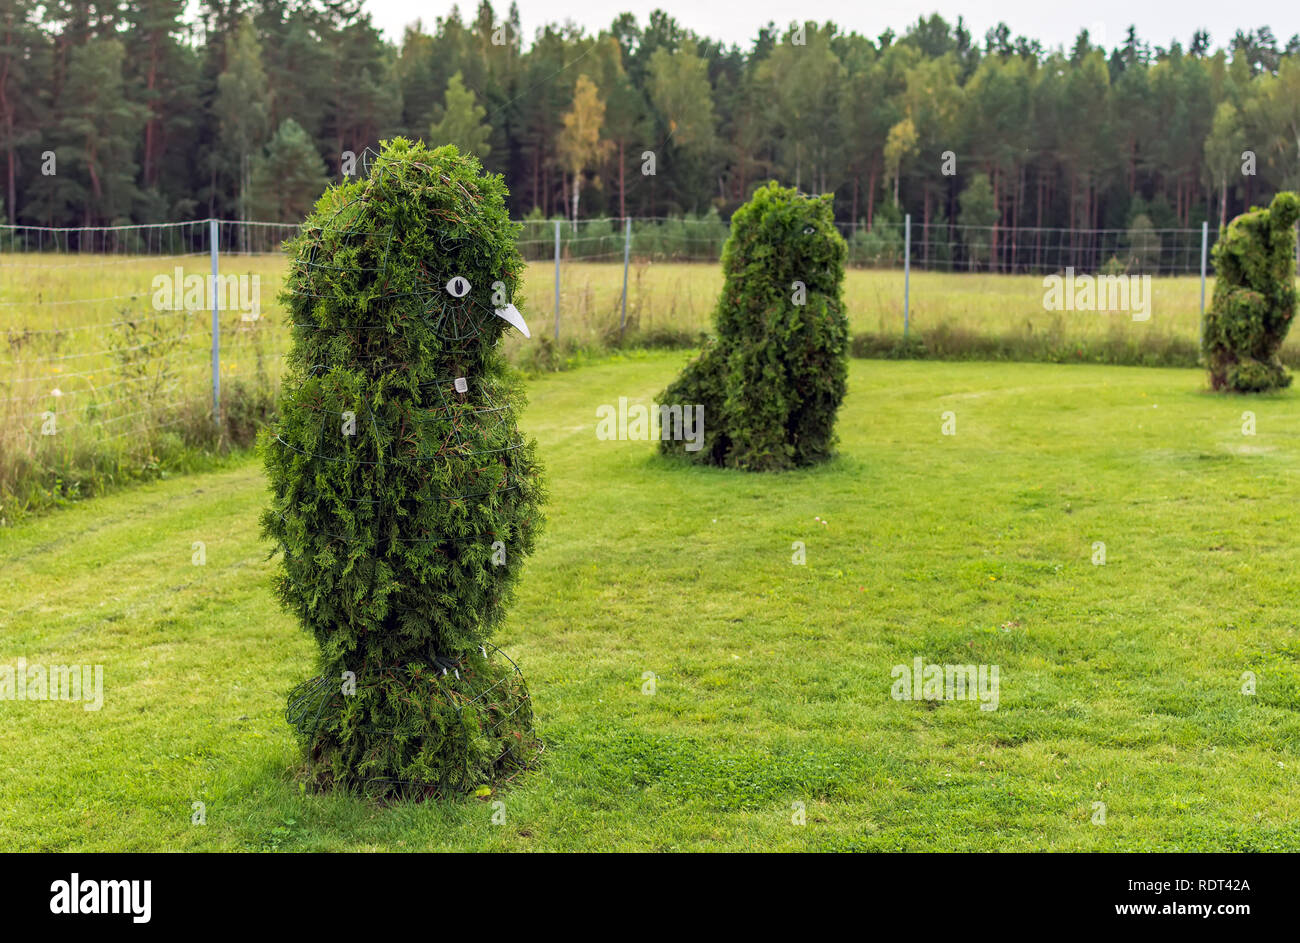 Anyksciai, Lithuania - September 8, 2018: Owl and Lion shaped bushes in a topiary garden. Green owl and lion figures made of arborvitae. Stock Photo